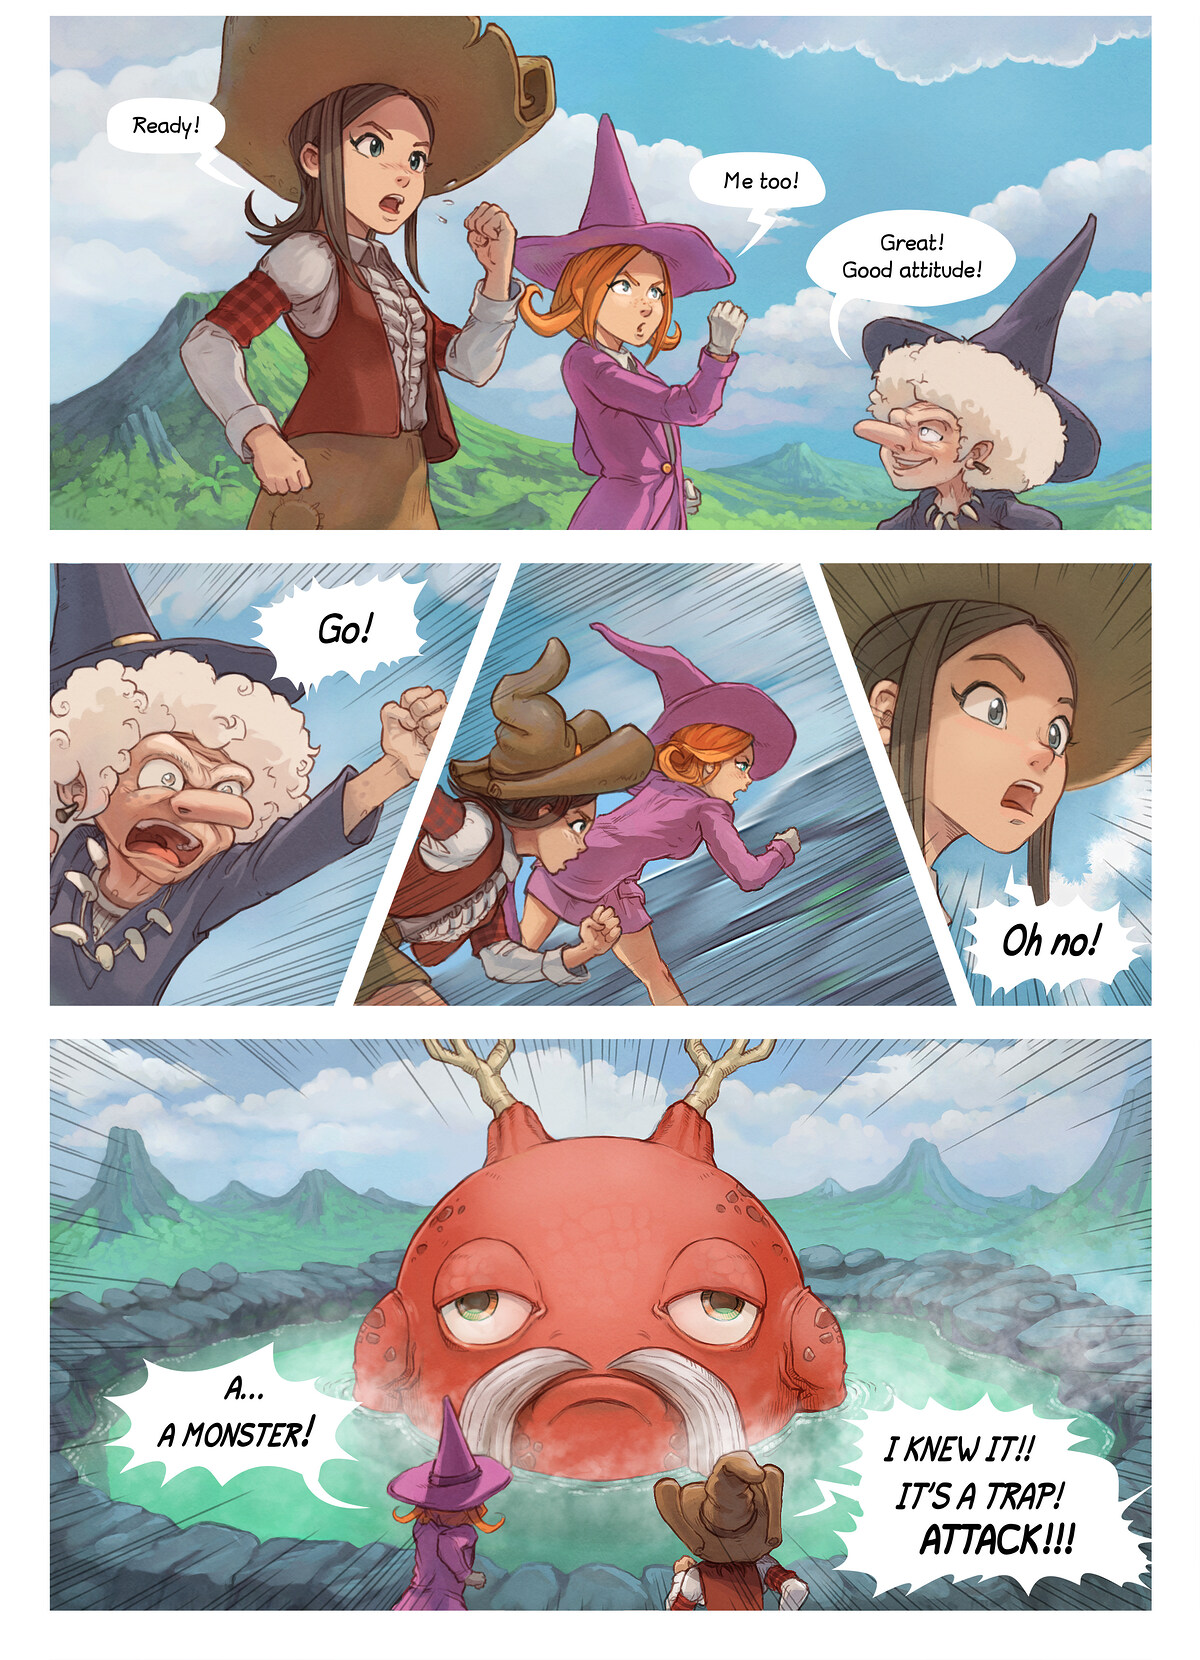 Episode 16: The Sage of the Mountain, Page 5